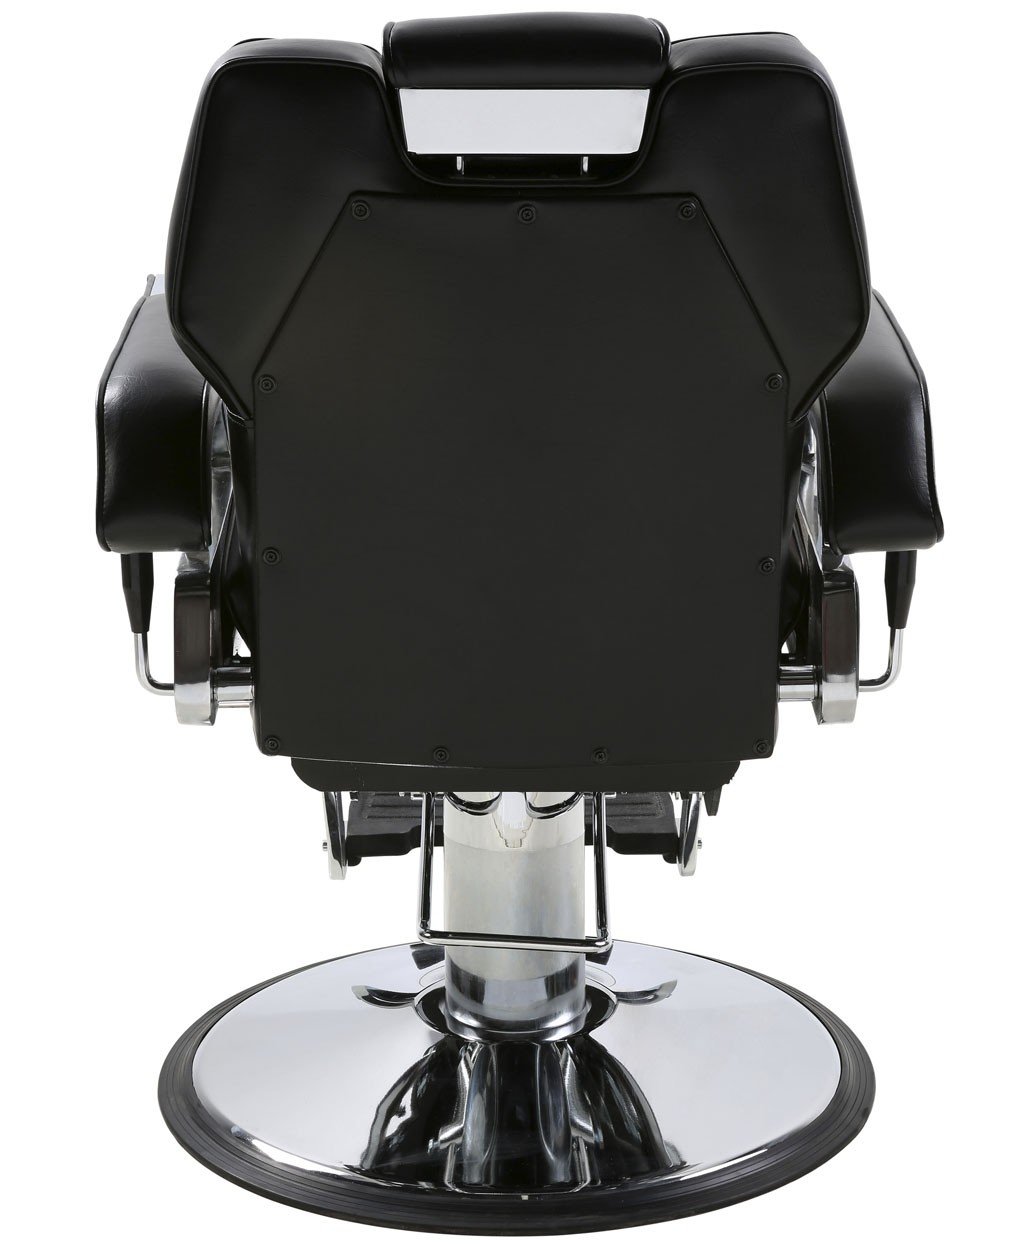 K.O. Professional Barber Chair